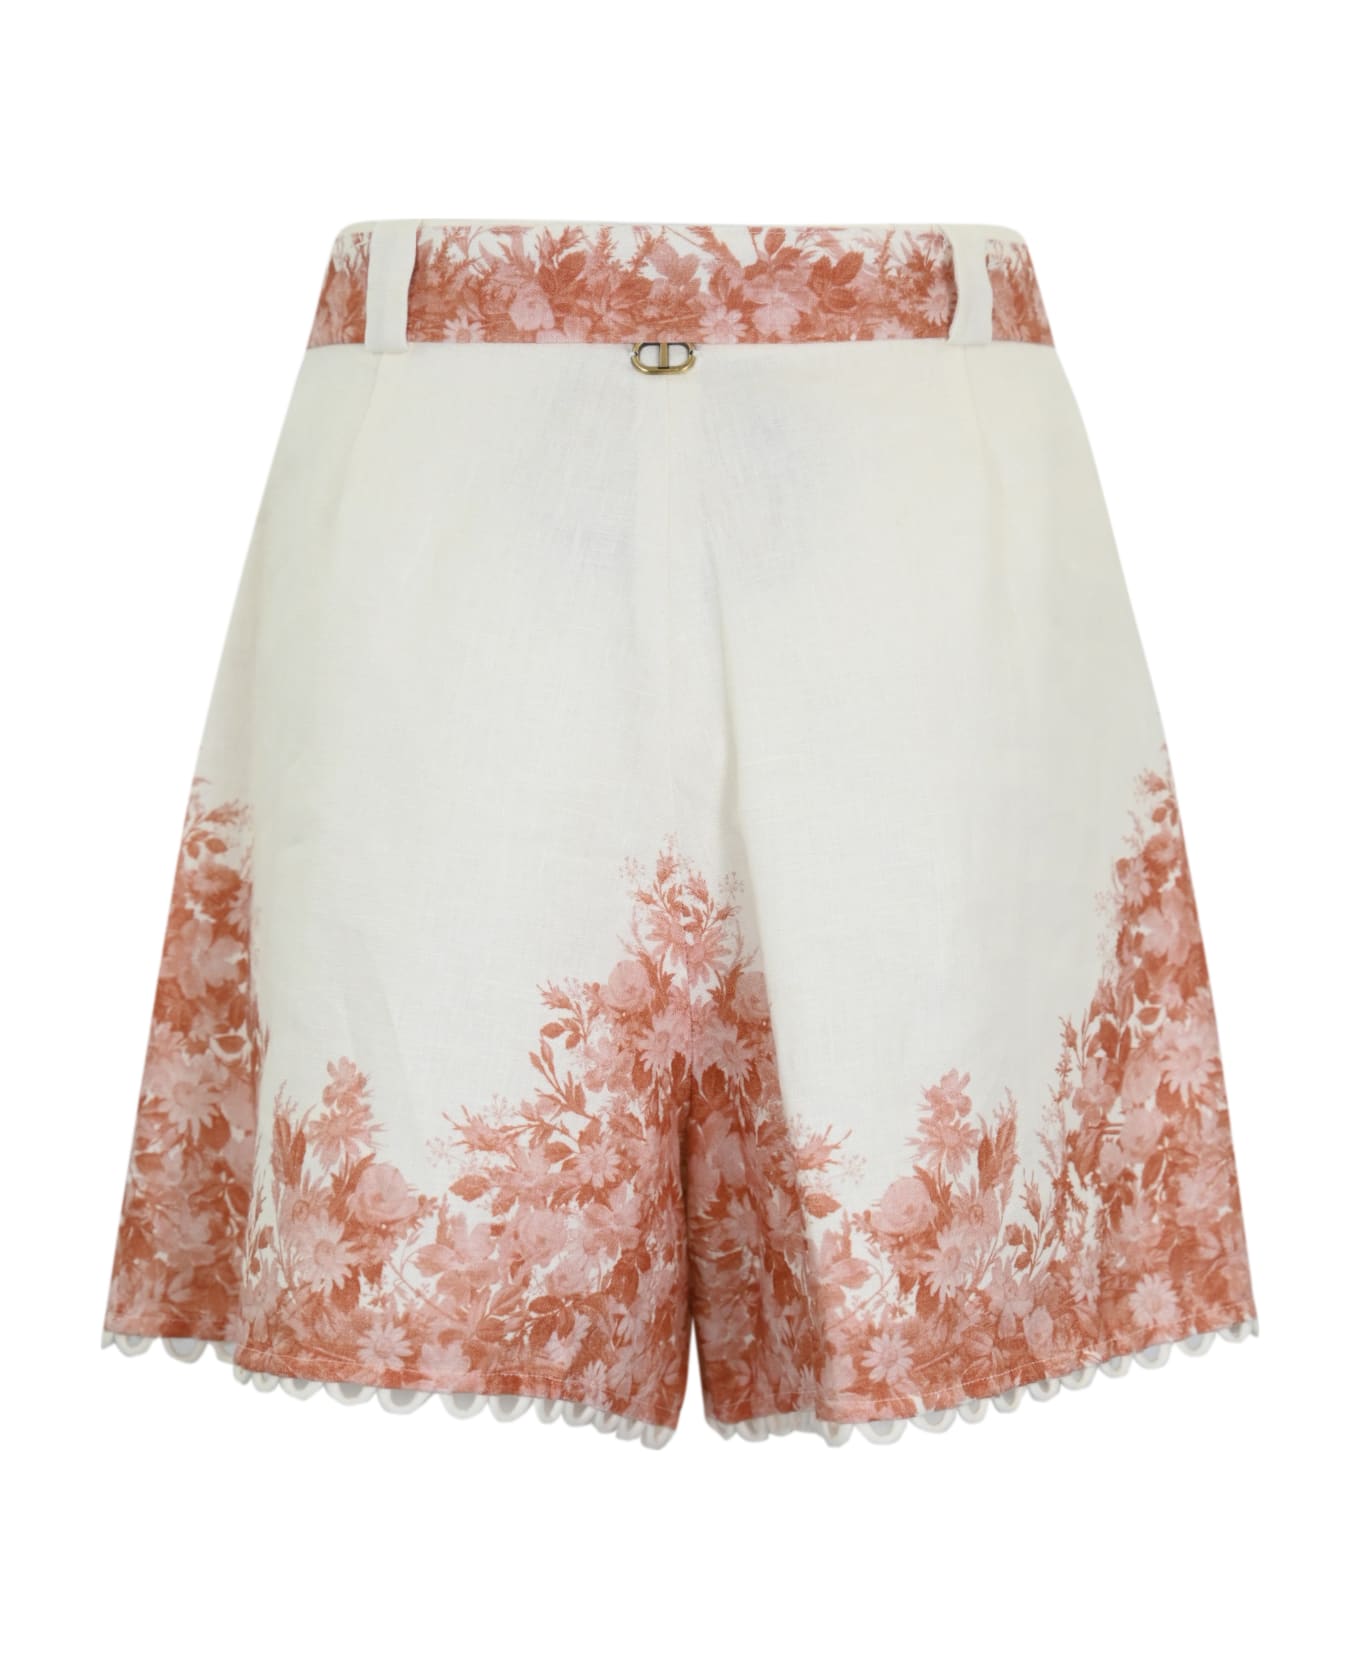 TwinSet Linen Shorts With Floral Print - Pomice/cra